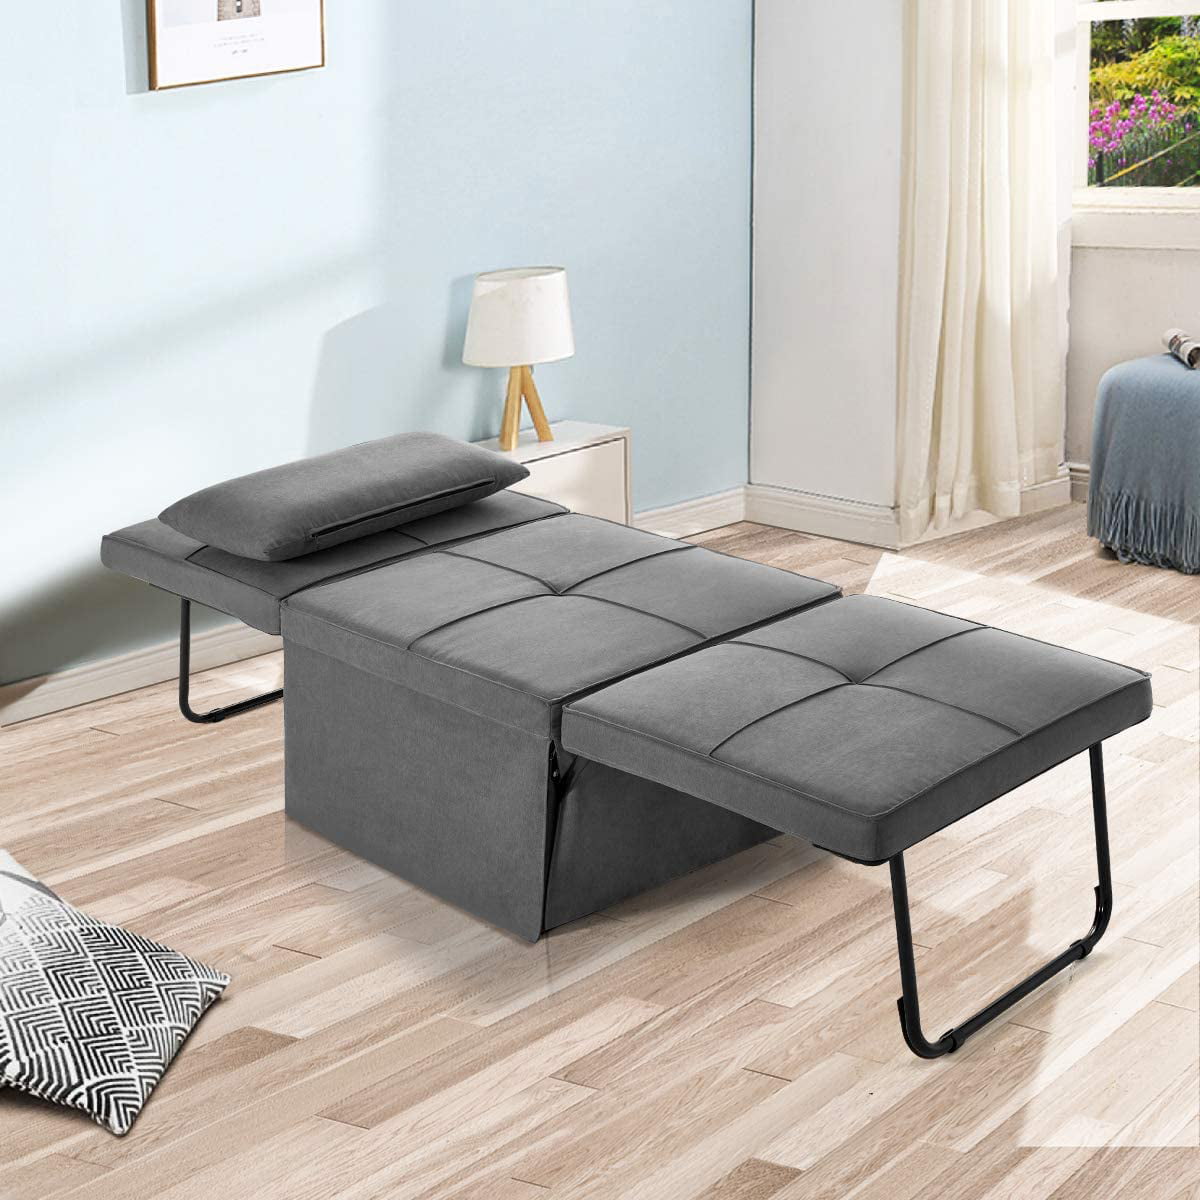 Erommy Sofa Bed  Convertible Chair  4 in 1 Multi Function 